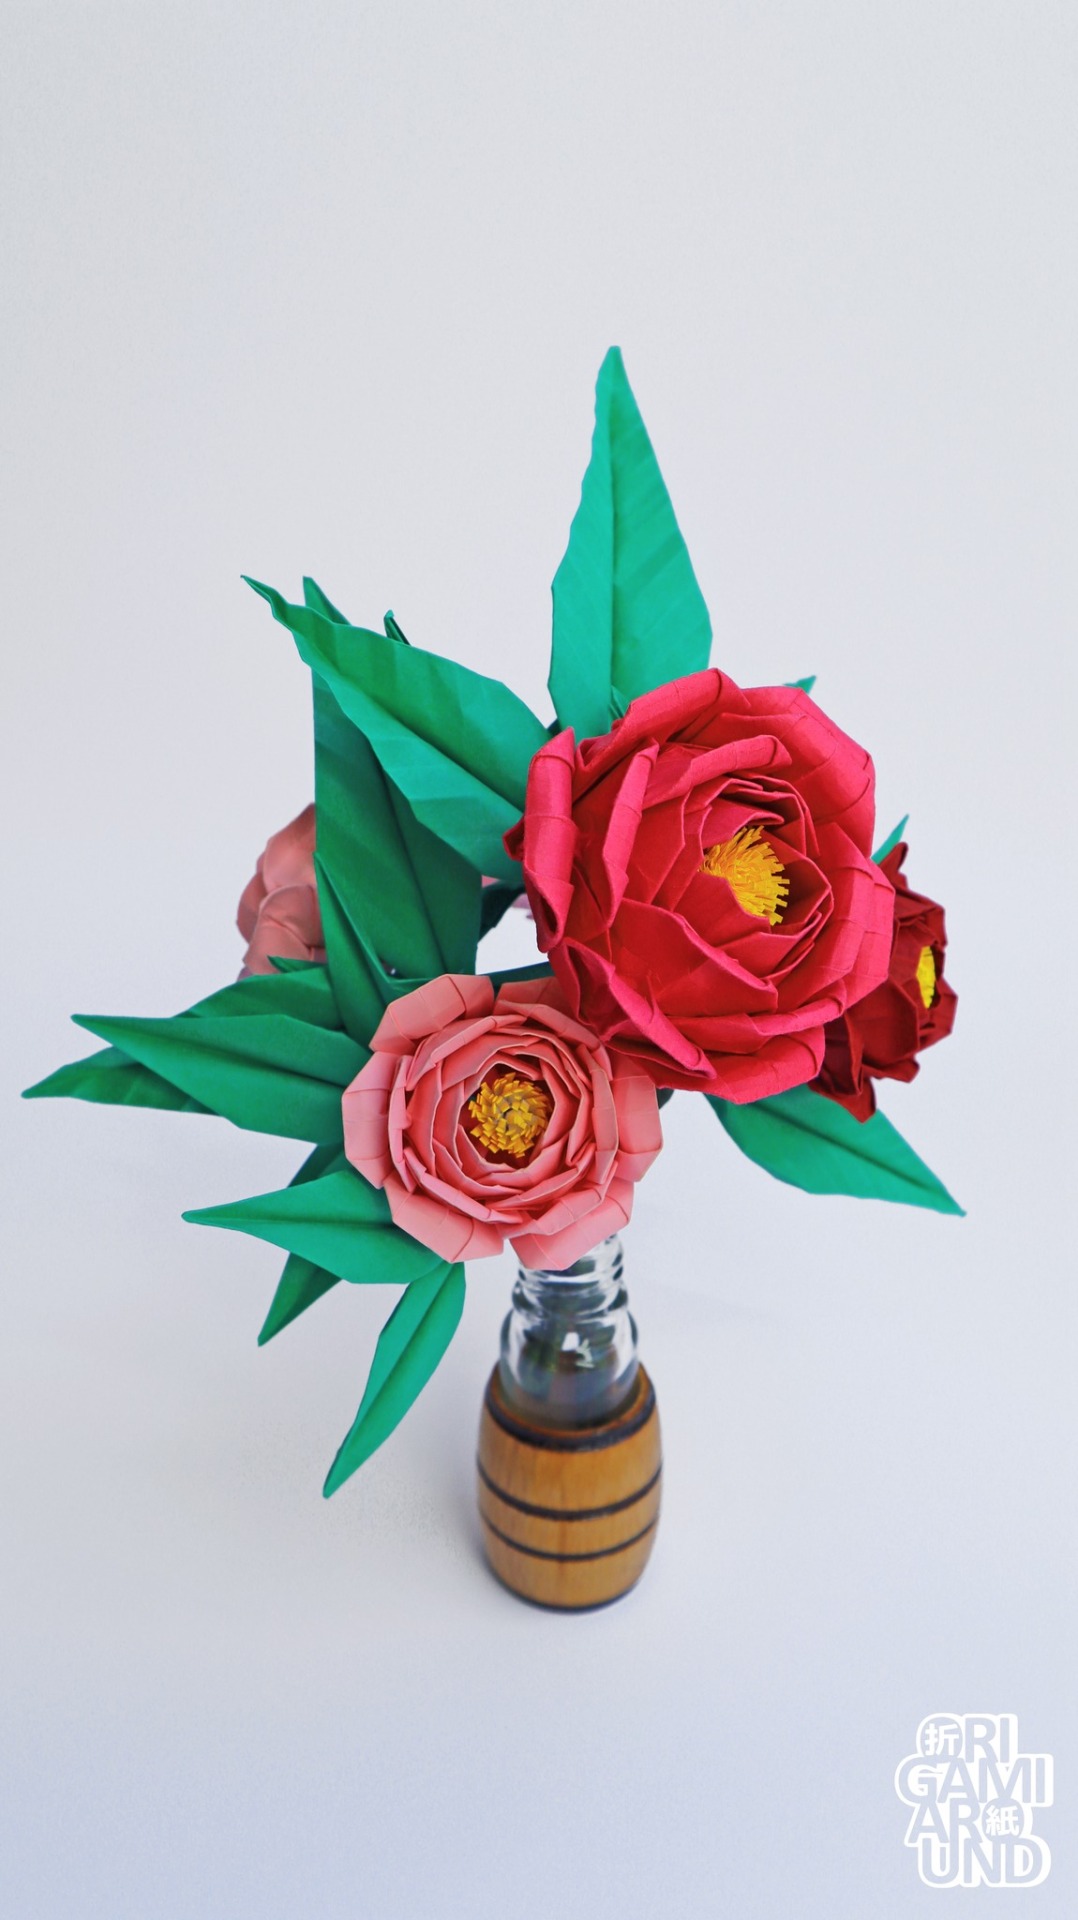 Origami Around 2 — Really easy papercraft rose (Paper rose) It's